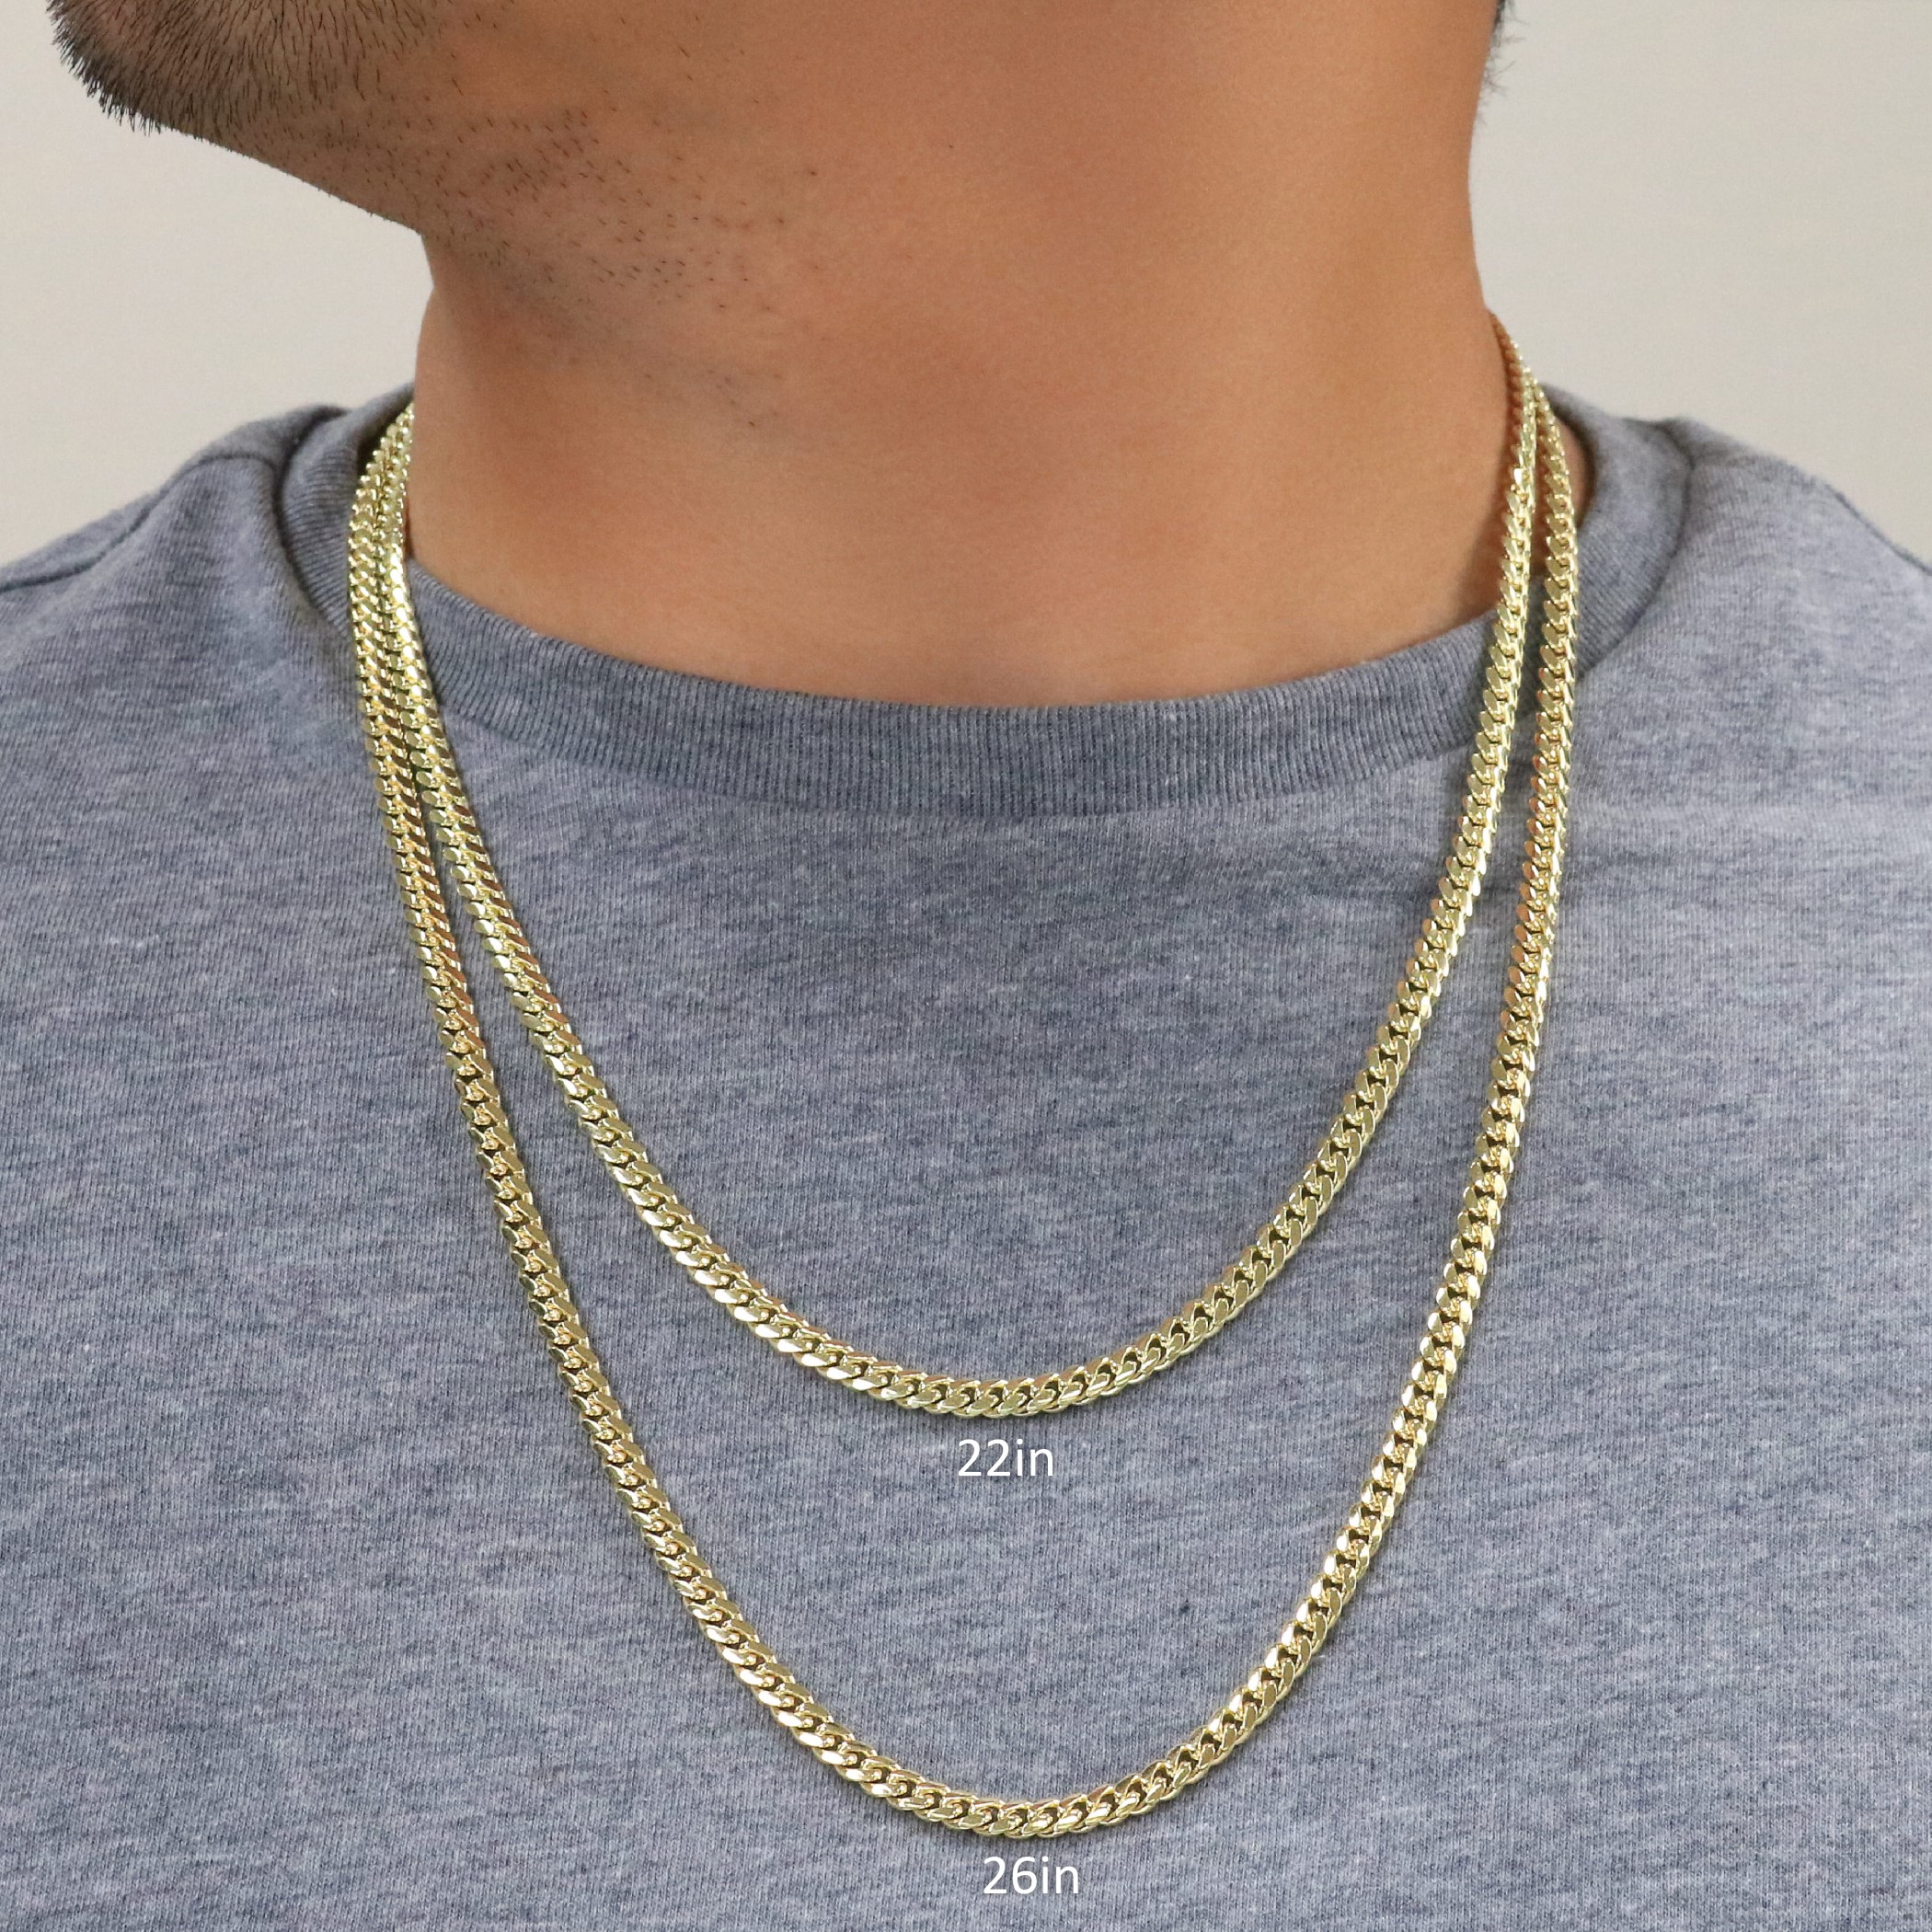 Nuragold 14k Yellow Gold 5mm Solid Miami Cuban Link Chain Pendant Necklace, Mens Jewelry Box Clasp 16" - 30" - image 2 of 11